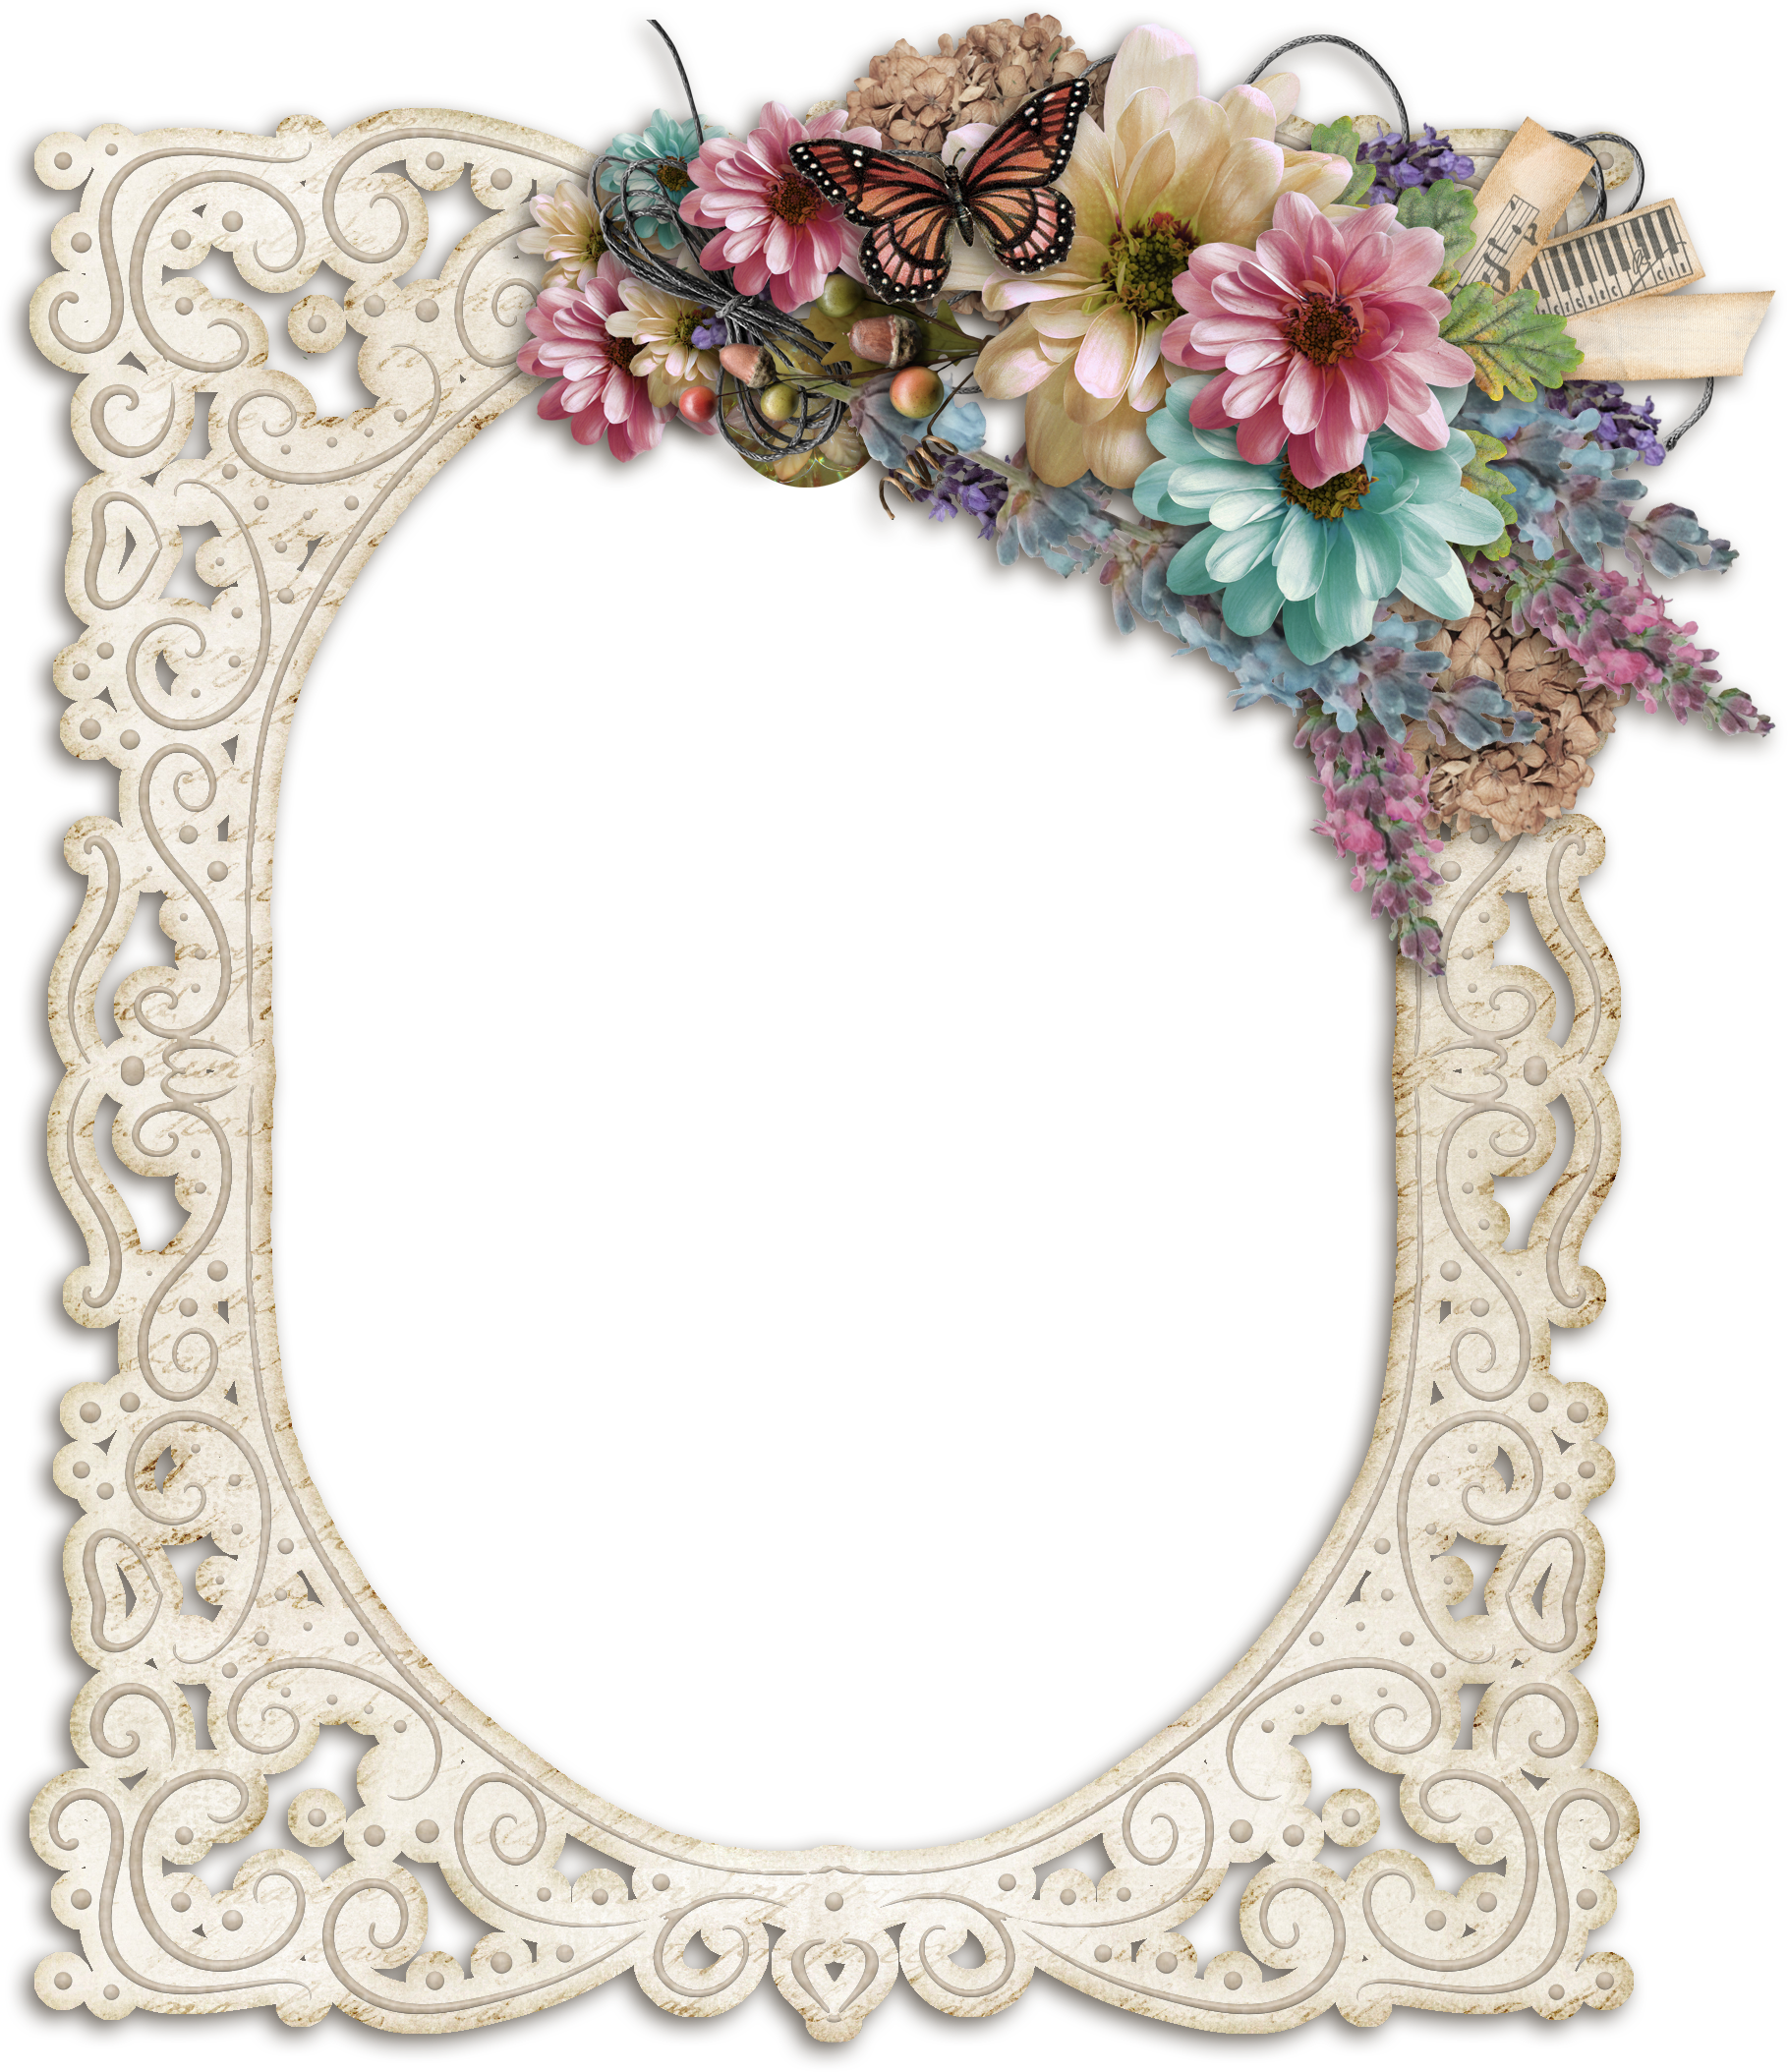 Lacy Frame With Flowers ~ Web - Dreamy Flower Frame Png Transparent (1819x2108)